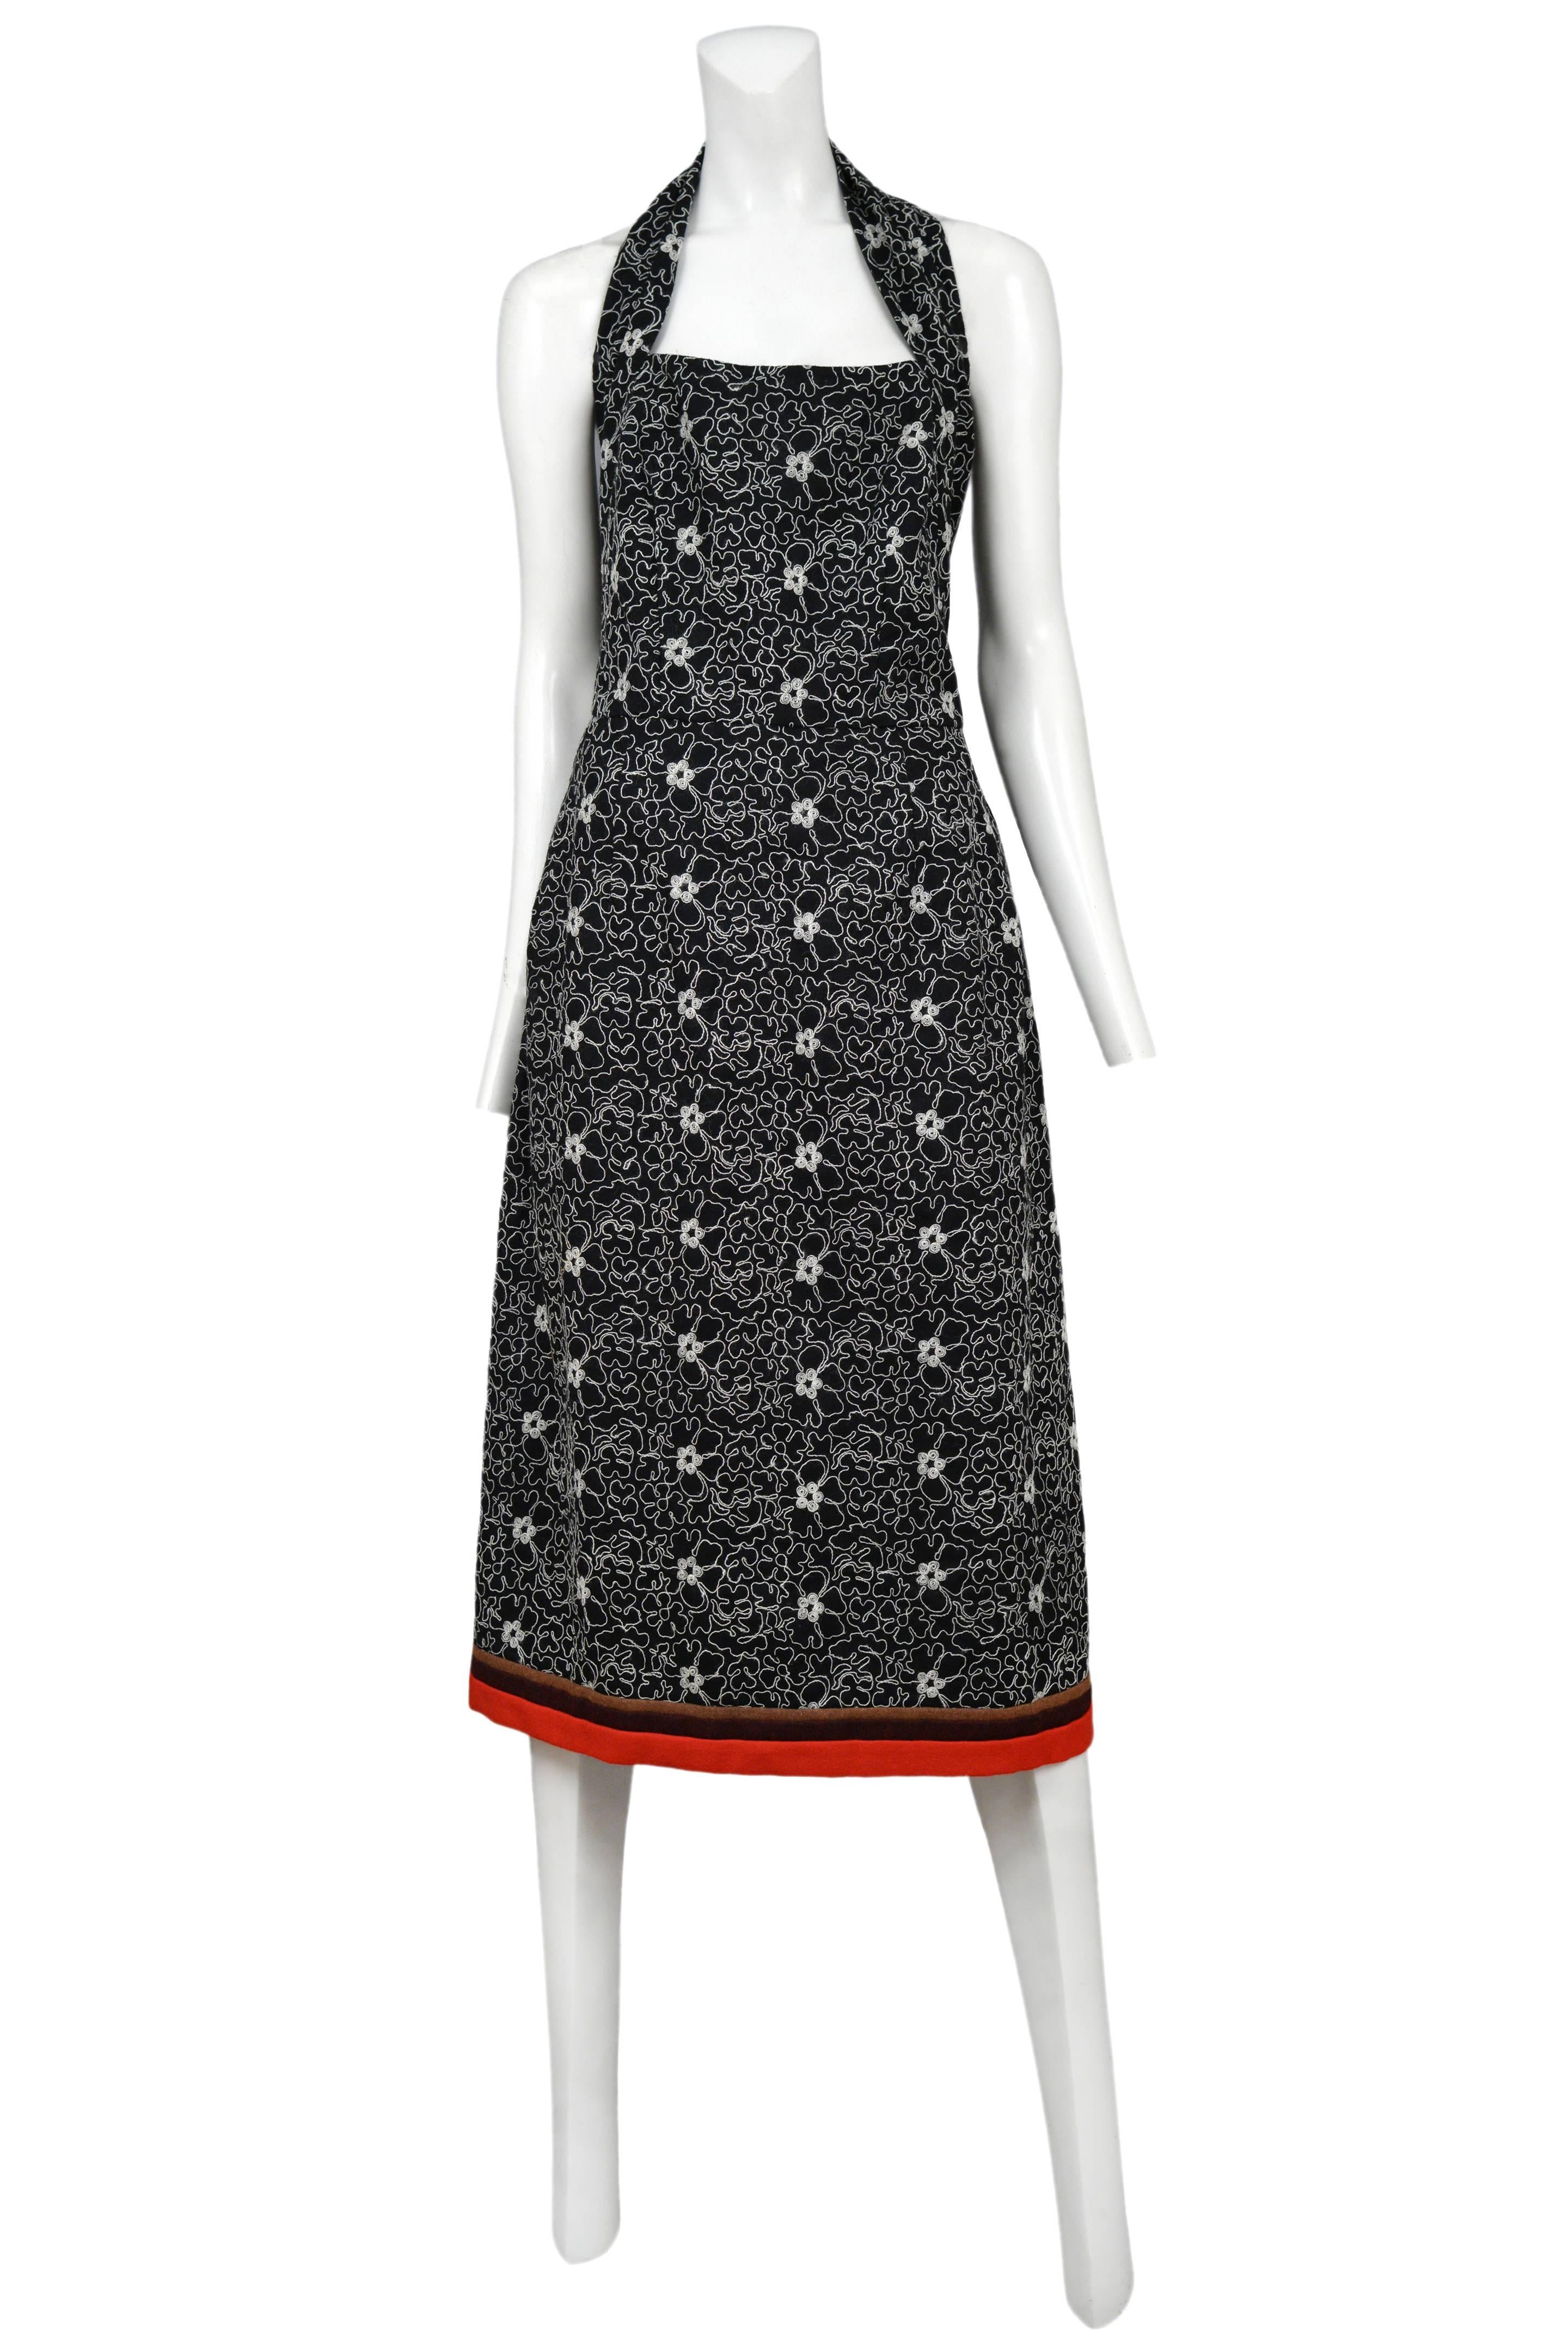 Vintage Comme des Garcons black halter dress featuring all over white floral embroidery and multi-color red, burgundy, and rust brown felted trim at hem. From the Autumn / Winter 1999 Collection.

Excellent Vintage Condition.

Please inquire for